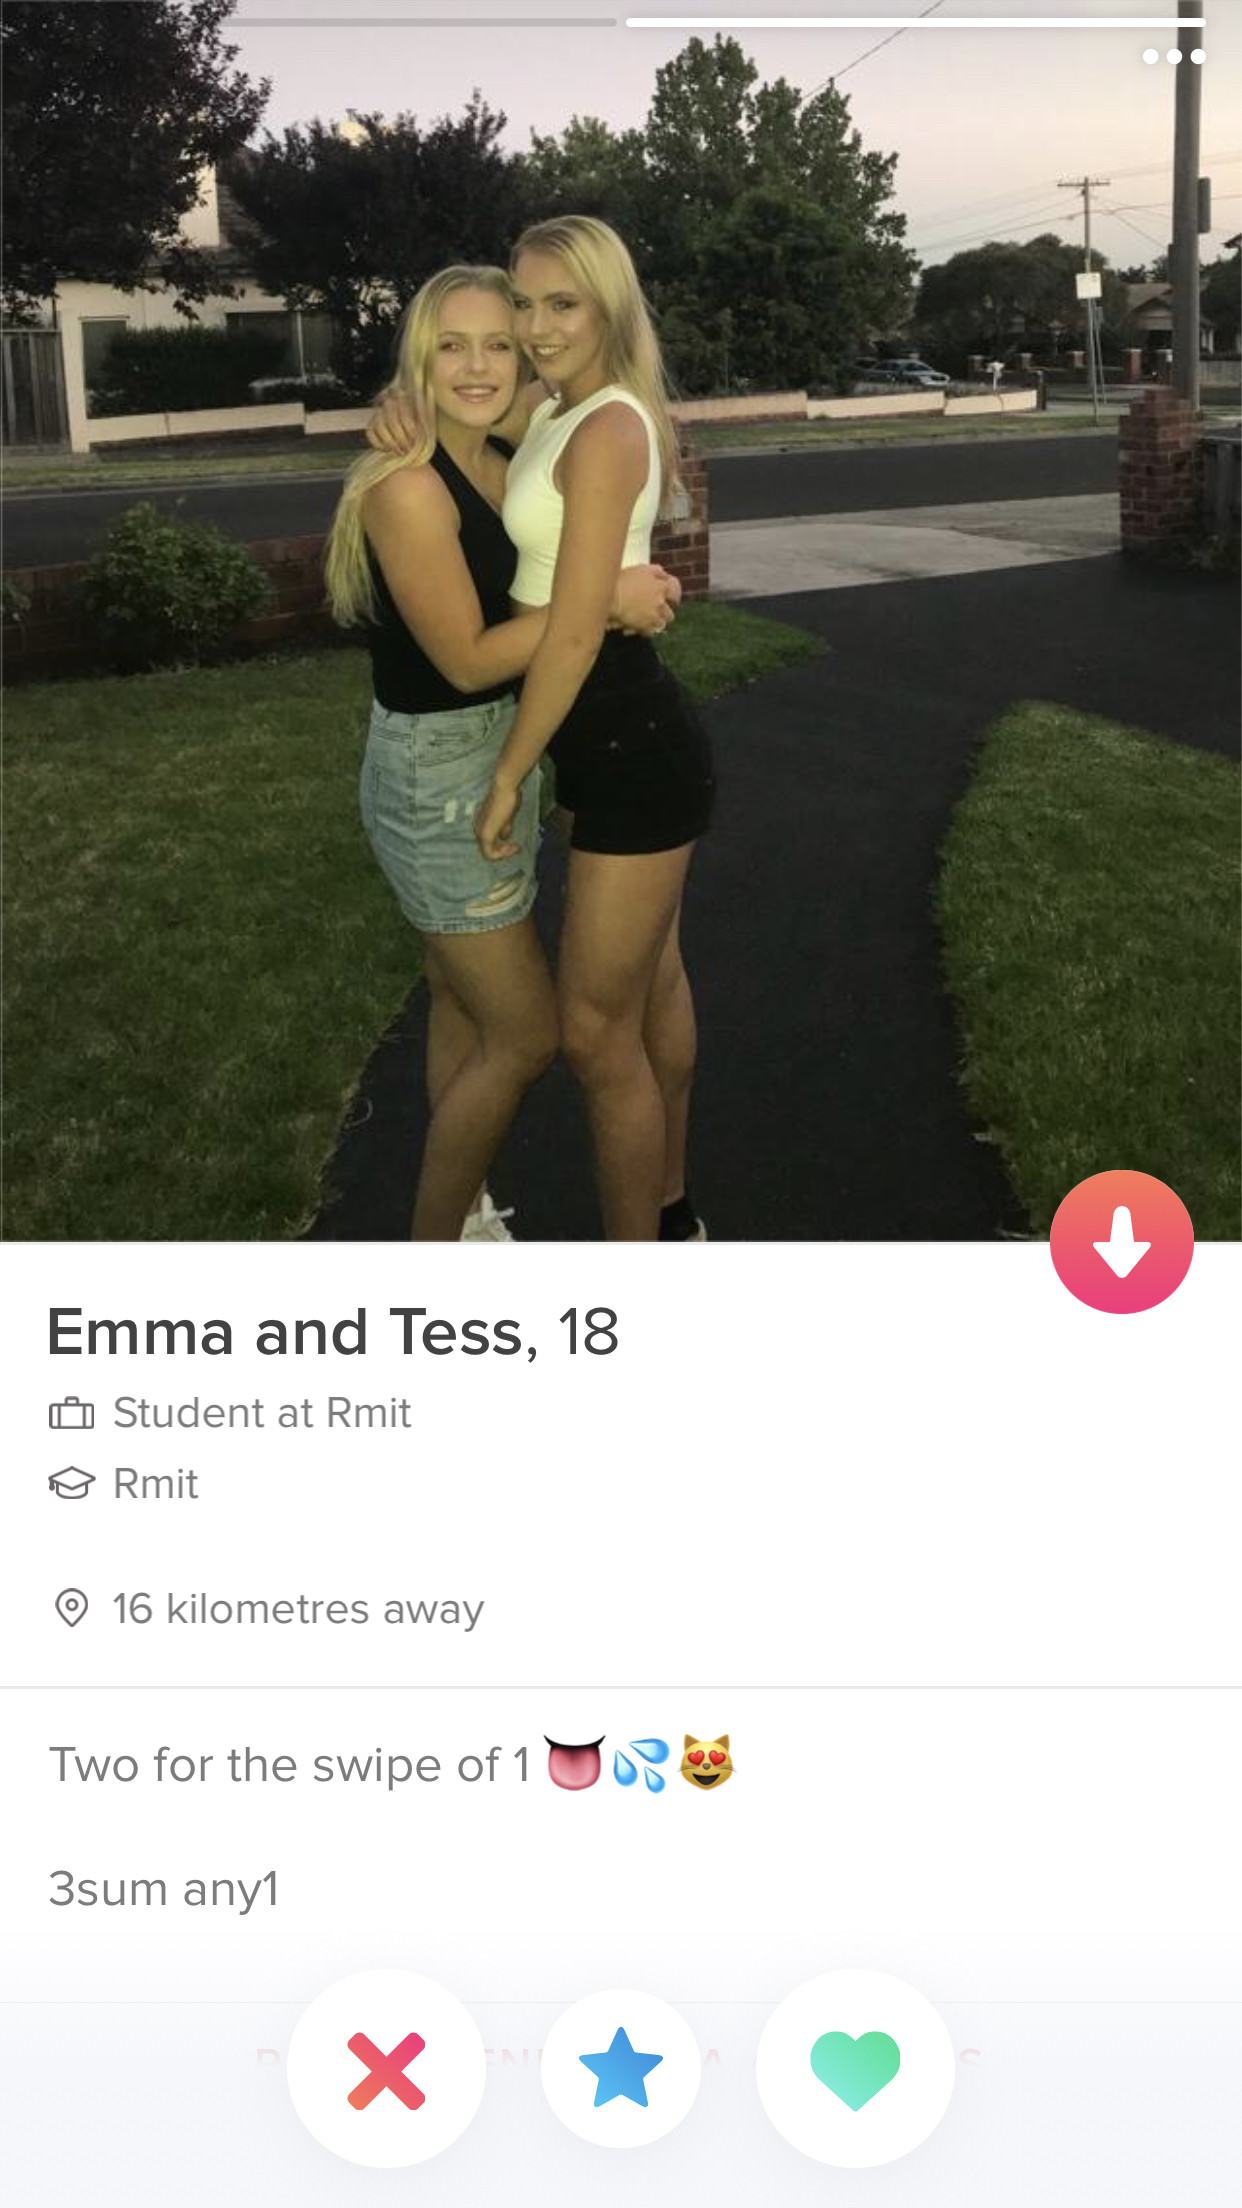 hot tinder 3sum - Emma and Tess, 18 Ii Student at Rmit 8 Rmit 16 kilometres away Two for the swipe of 1 Uro 3sum any1 X